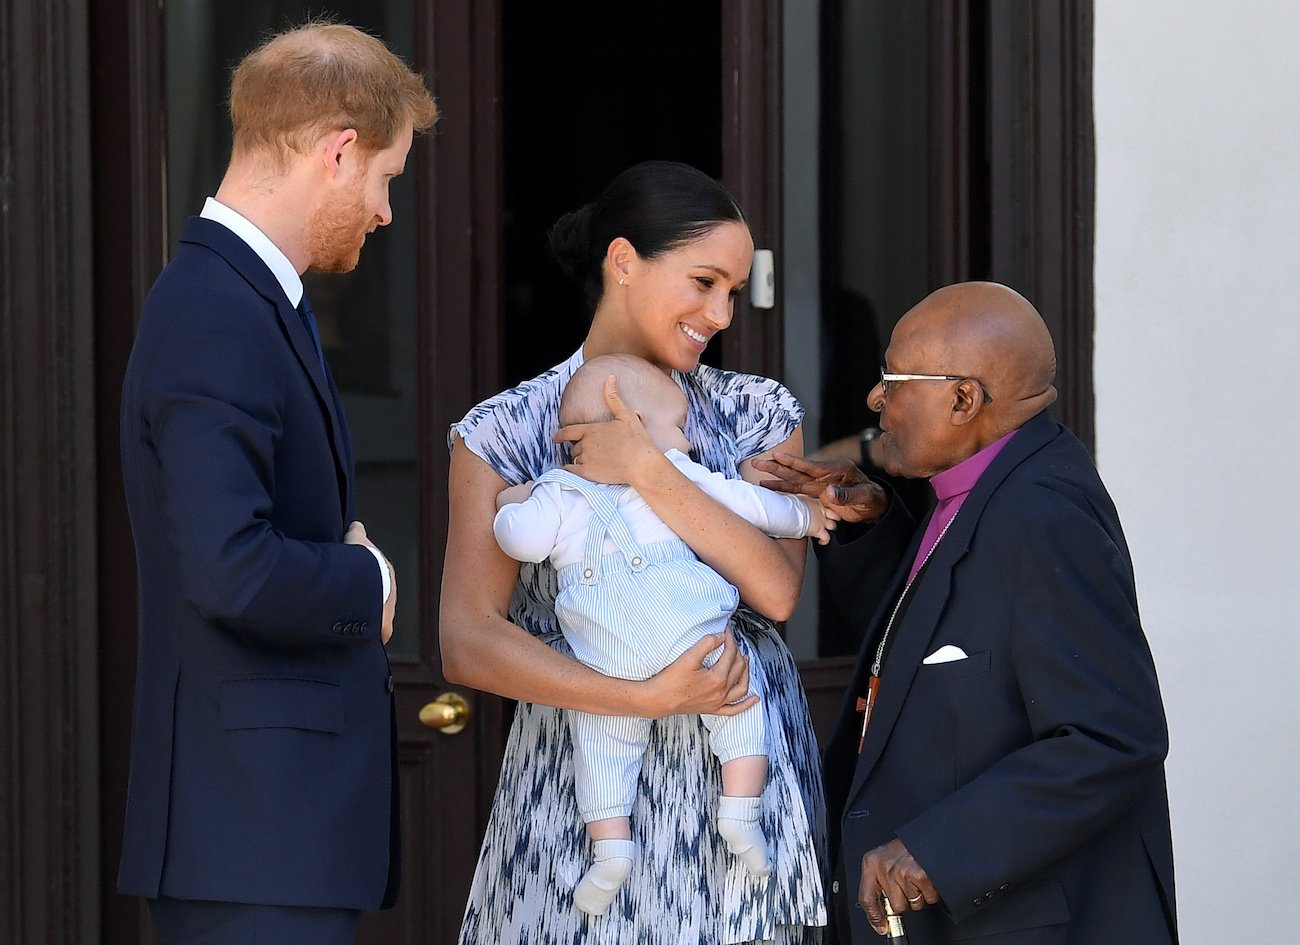 Prince Harry and Meghan Markle, who is holding son Archie, interacting with Desmond Tutu